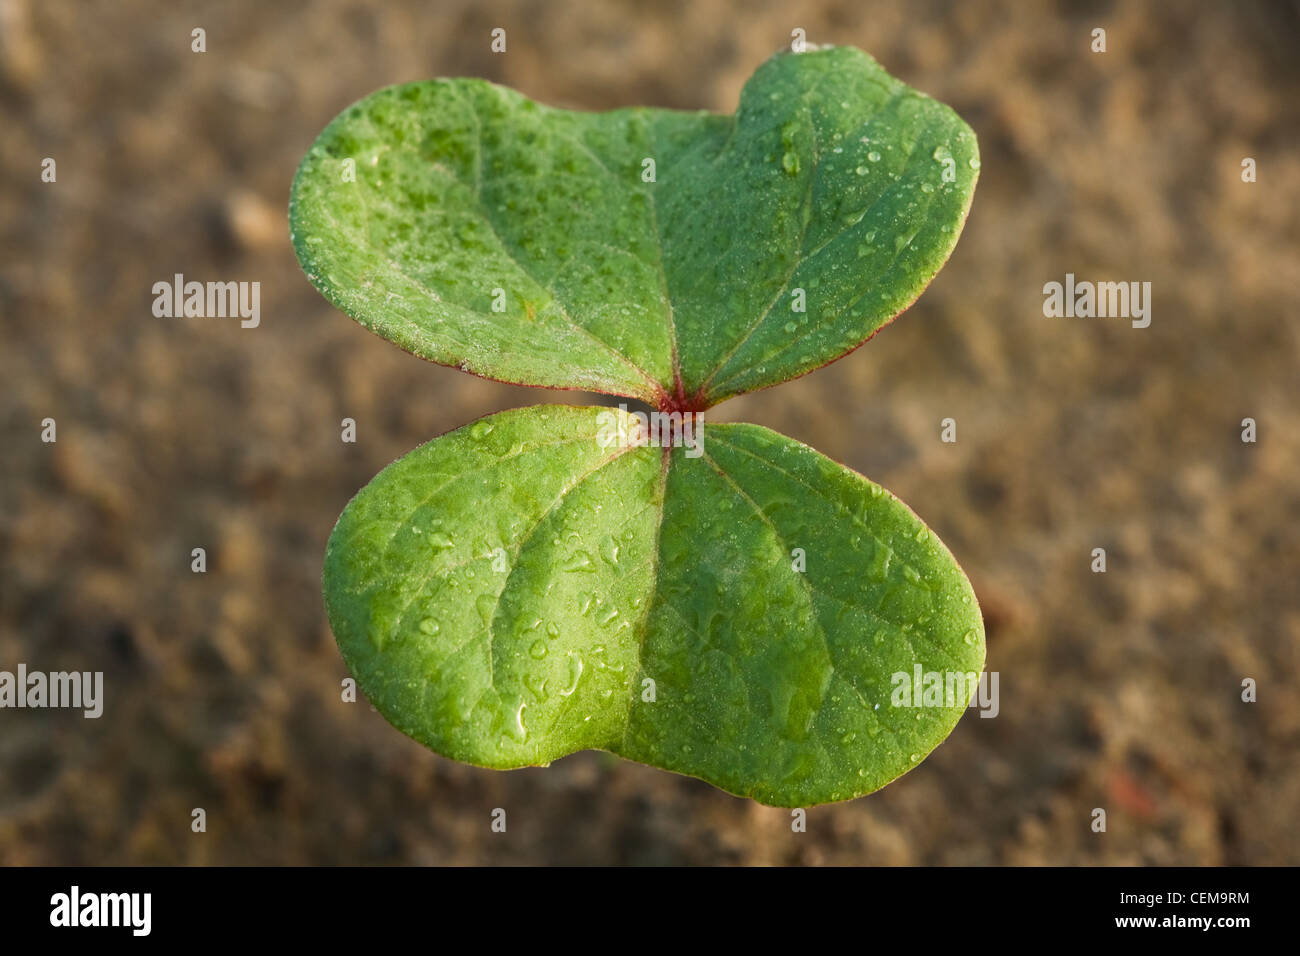 Closeup of a cotton seedling at the cotyledon stage, planted in a conventional tillage field / near England, Arkansas, USA. Stock Photo